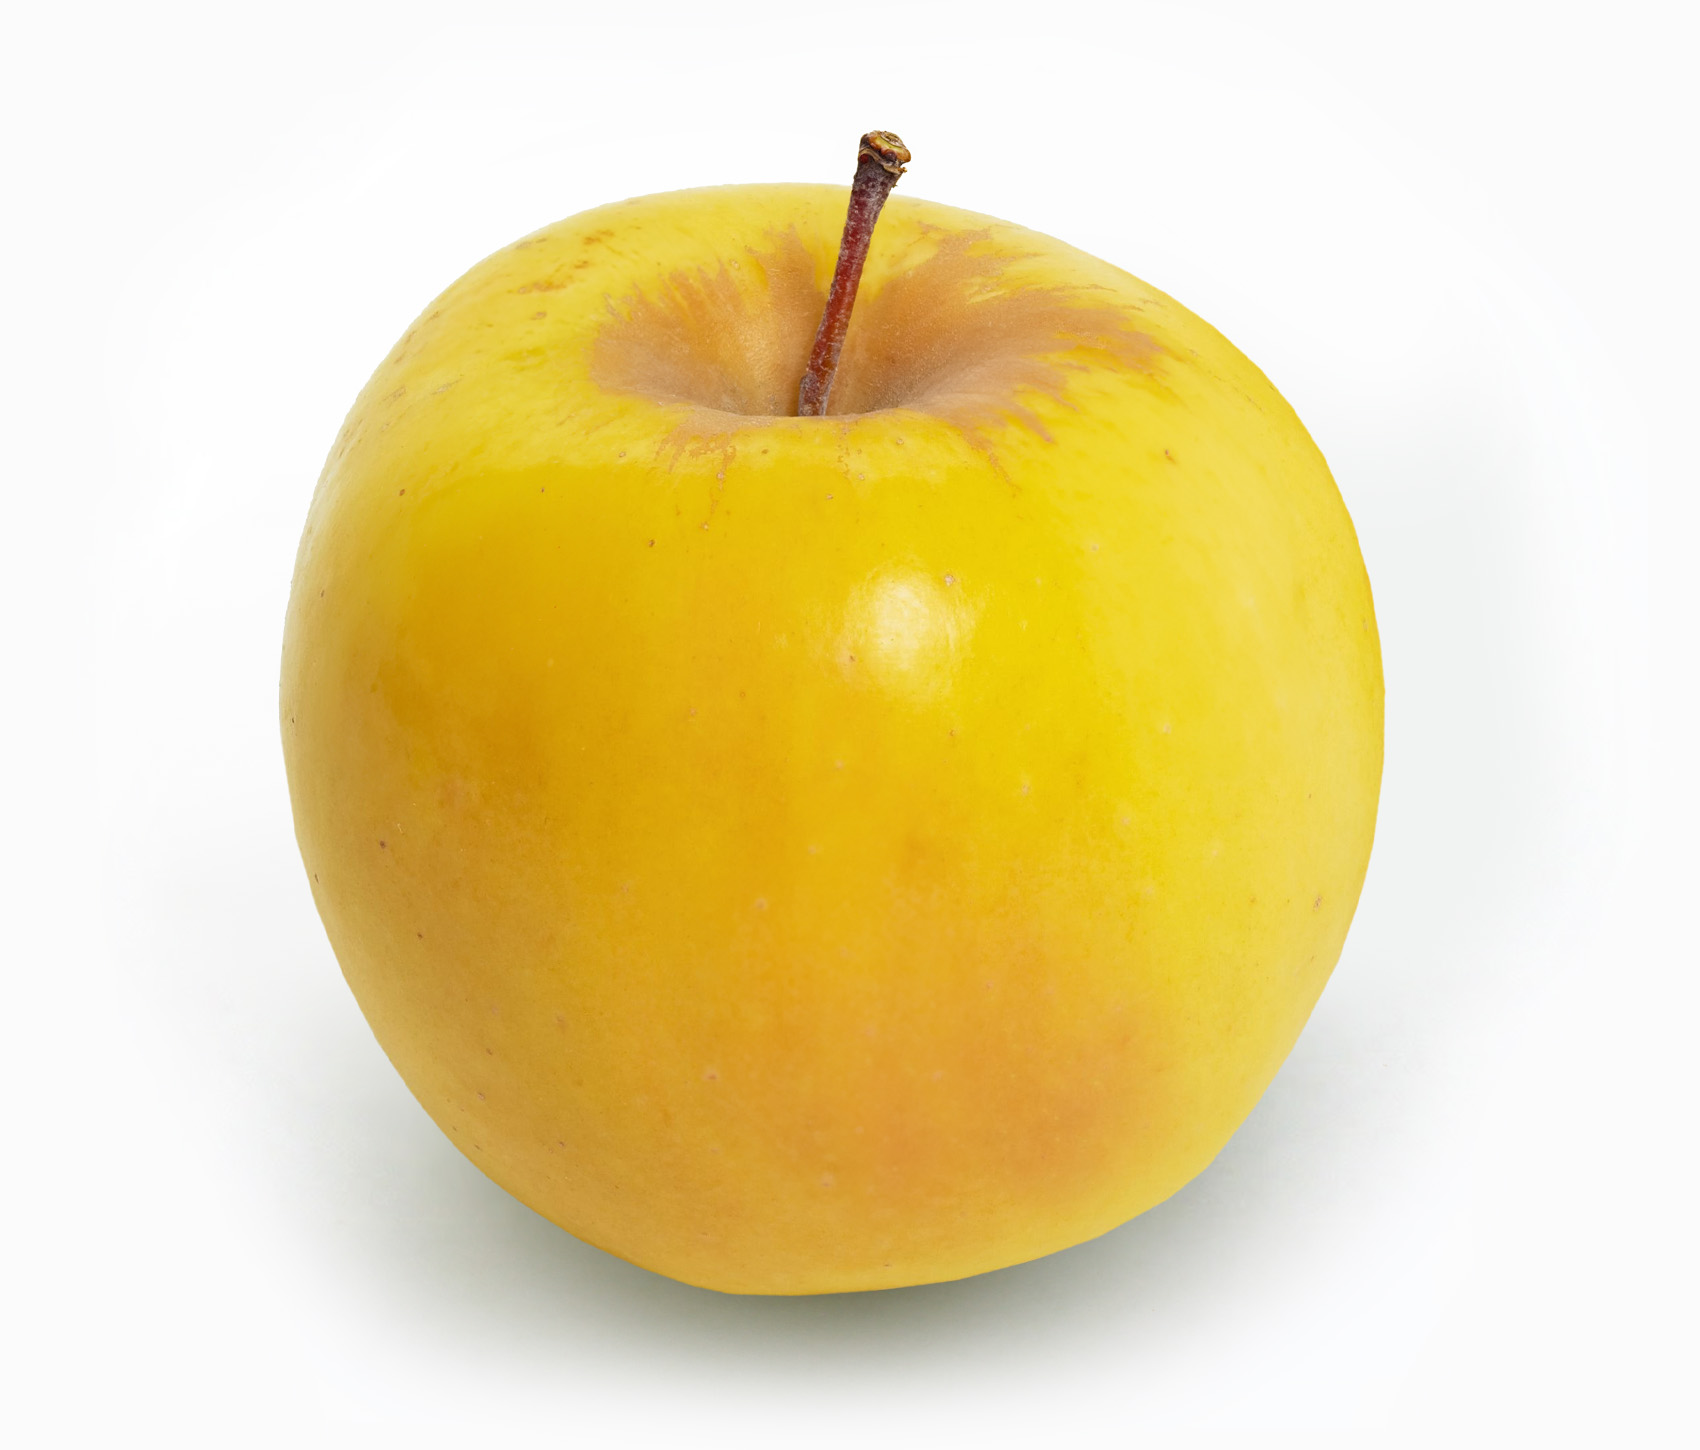 yellow apples and their uses -Opal apples 1.0